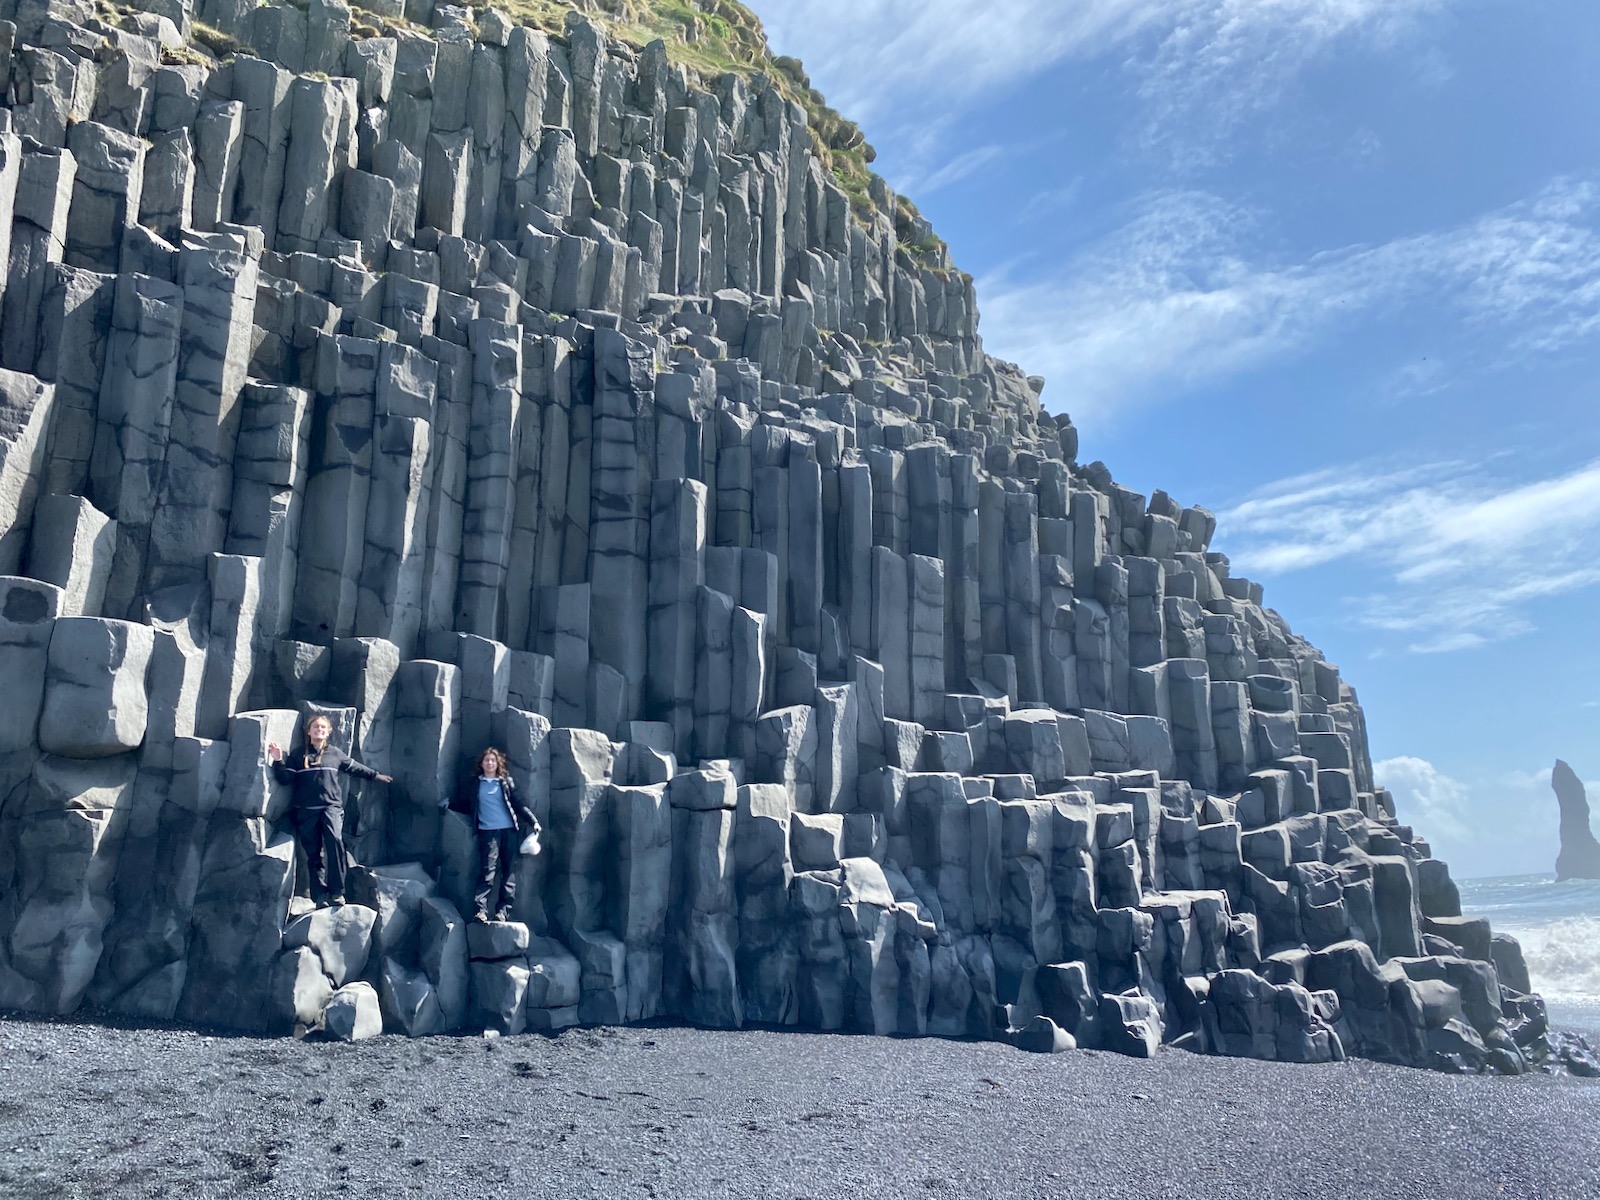 Sisters posing on the Basalt Columns in Iceland. 